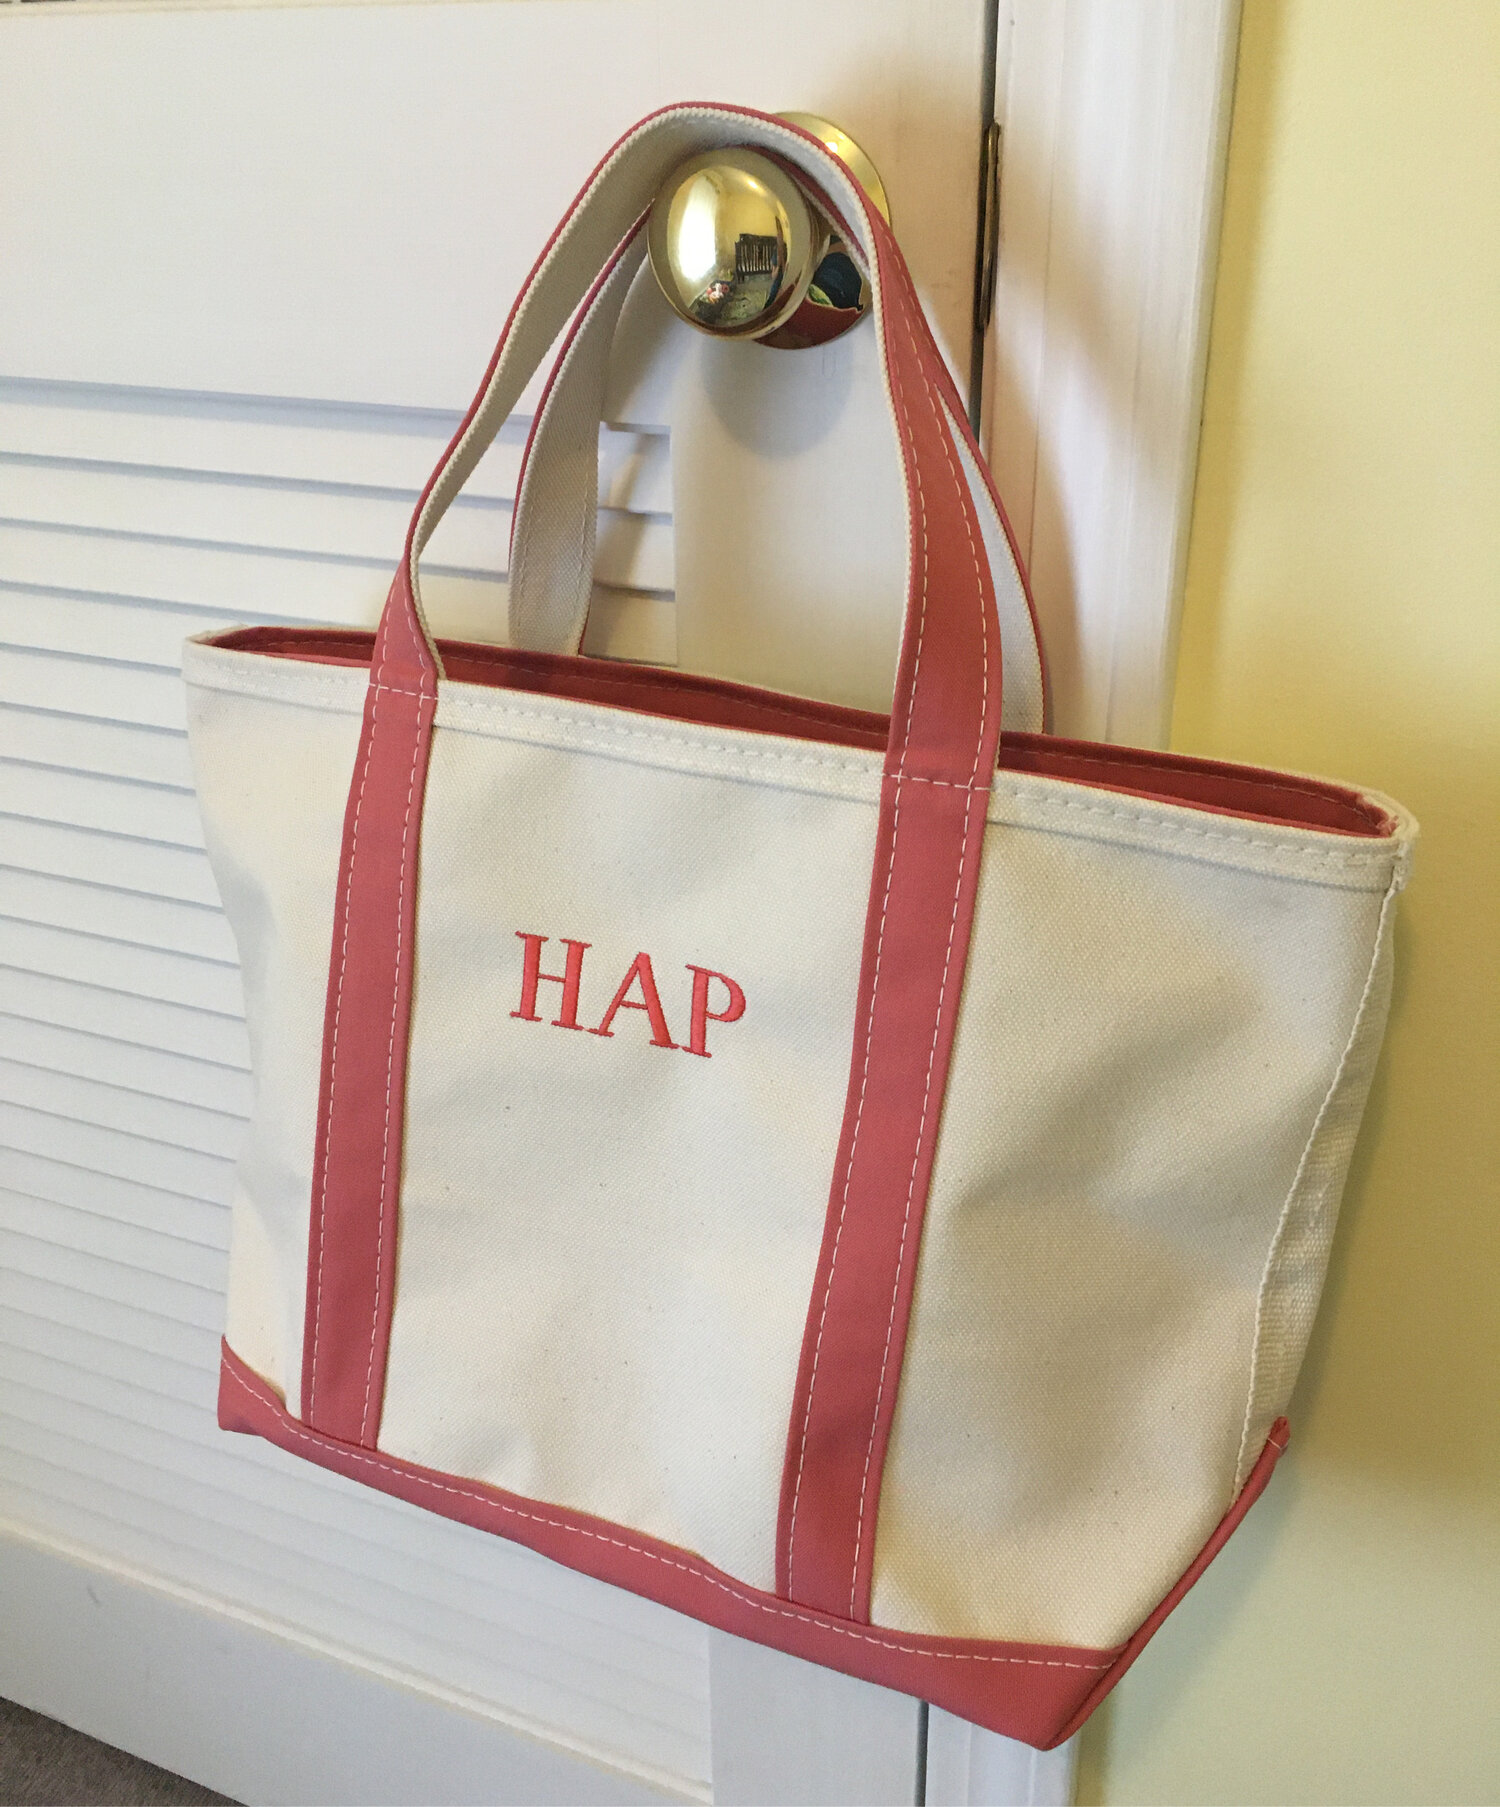 Monogrammed Medium Boat Tote - More Colors Available